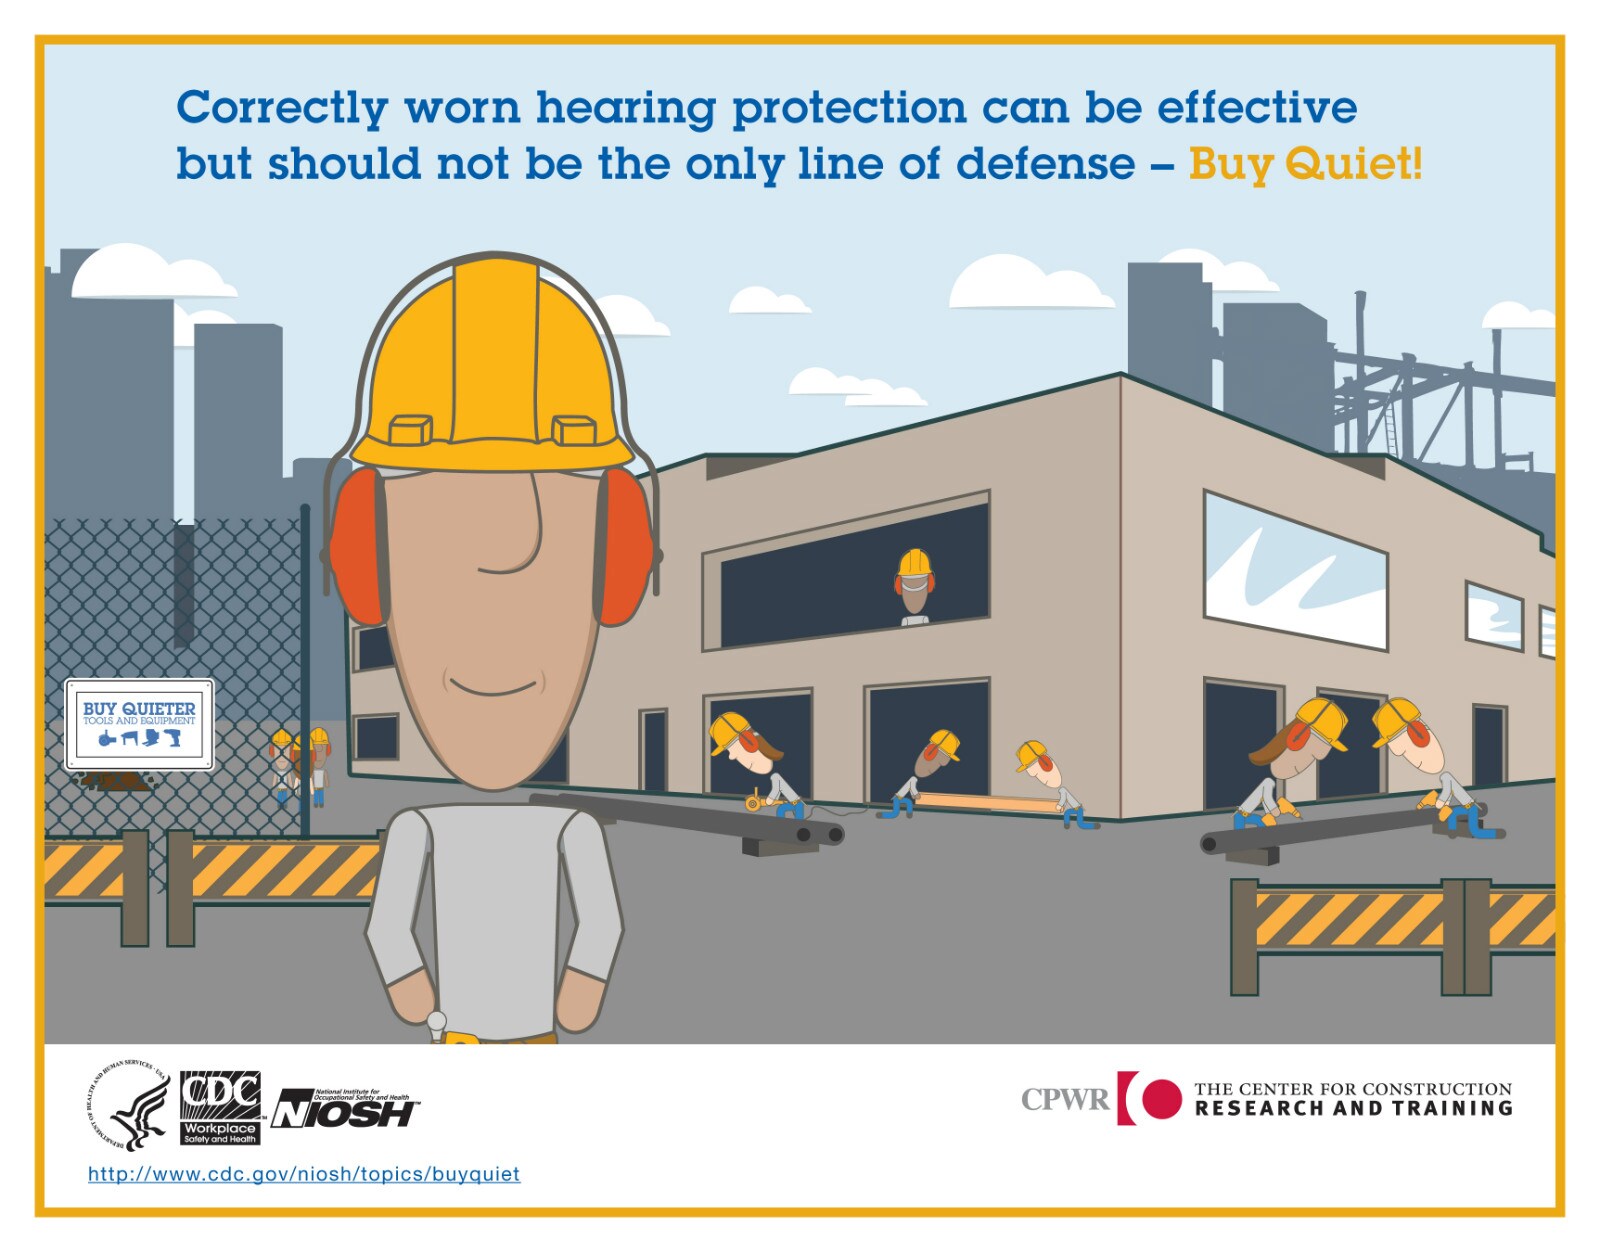 Correctly worn hearing protection can be effective but should not be the only line of defense. Buy Quiet!